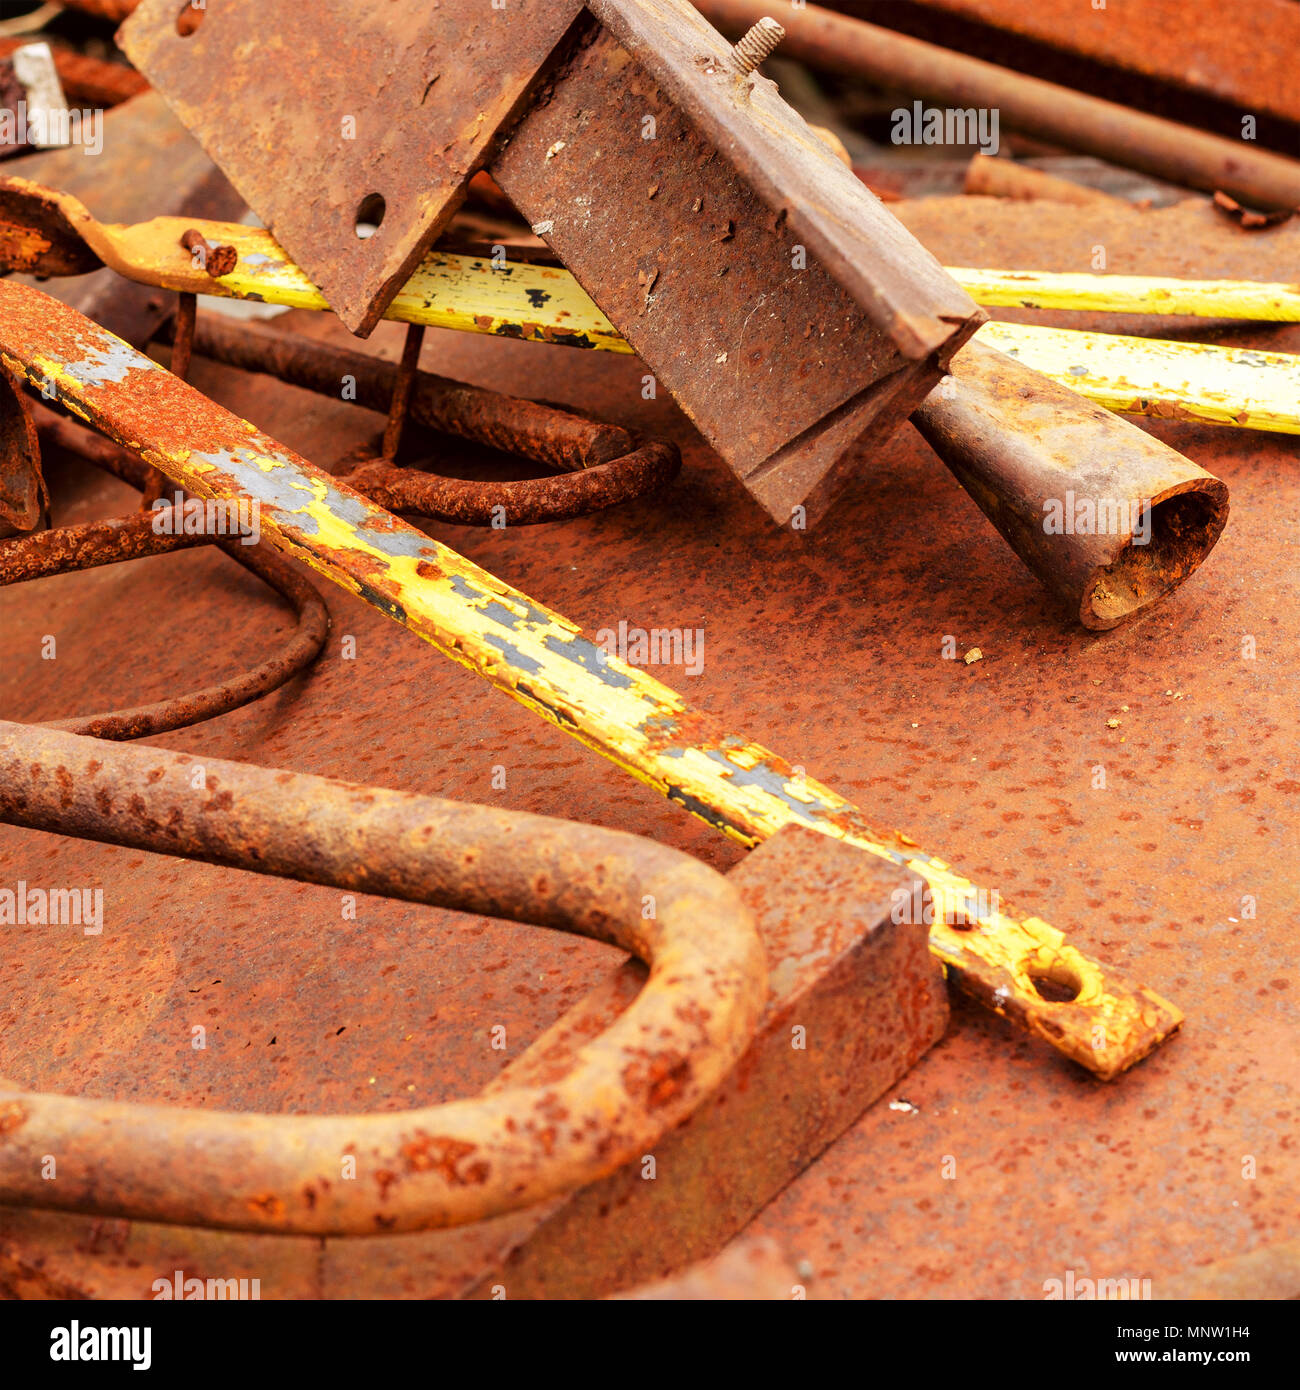 Pile of different old, rusted scrap metal.Square. Toned. Close-up. Stock Photo